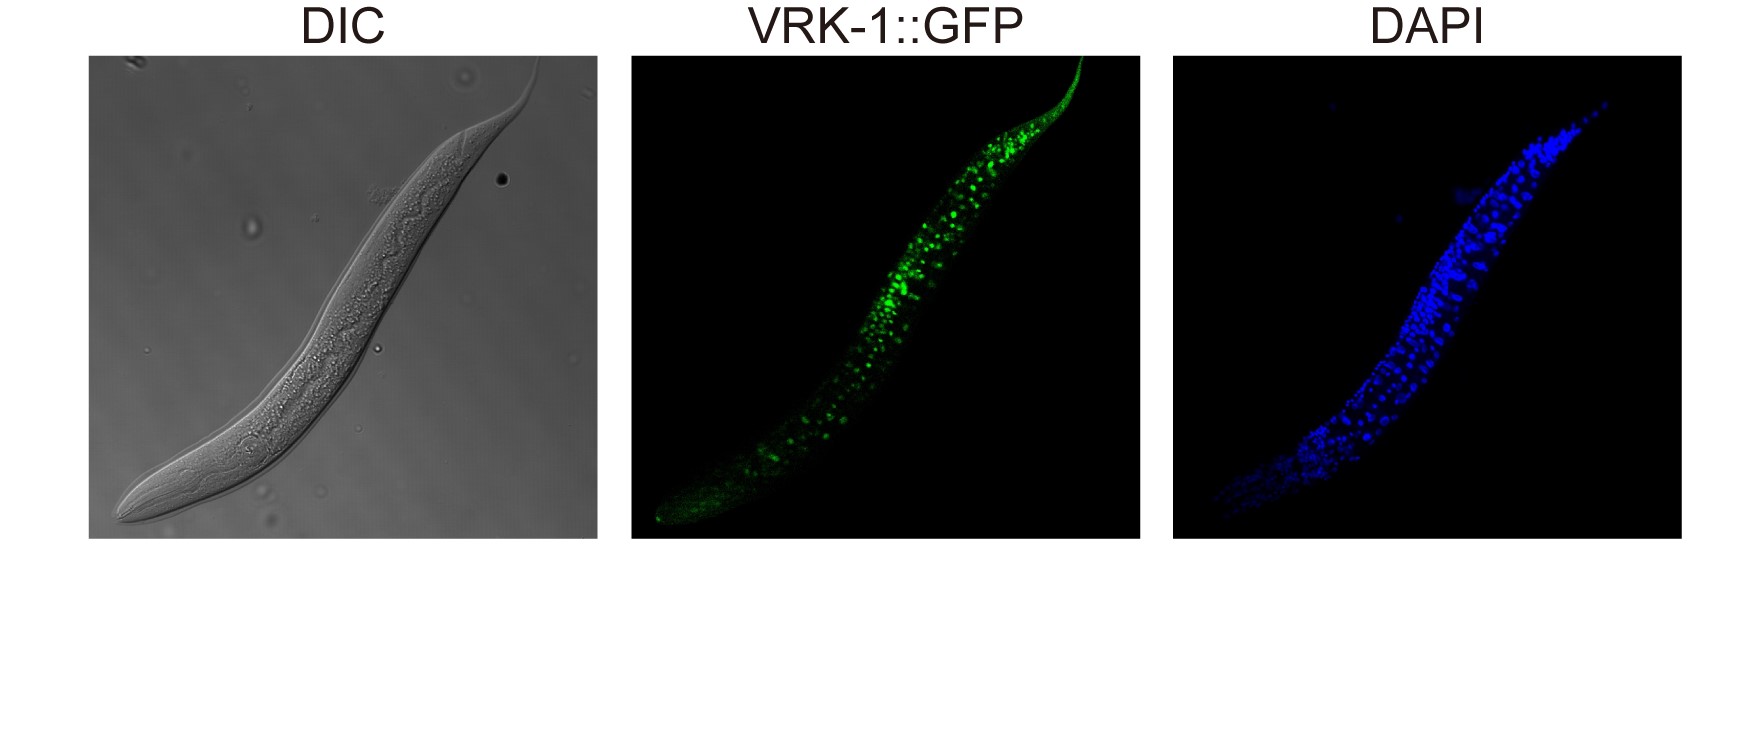 Image. VRK-1 that was visualized by tagging with green fluorescence protein (GFP) in C. elegans.